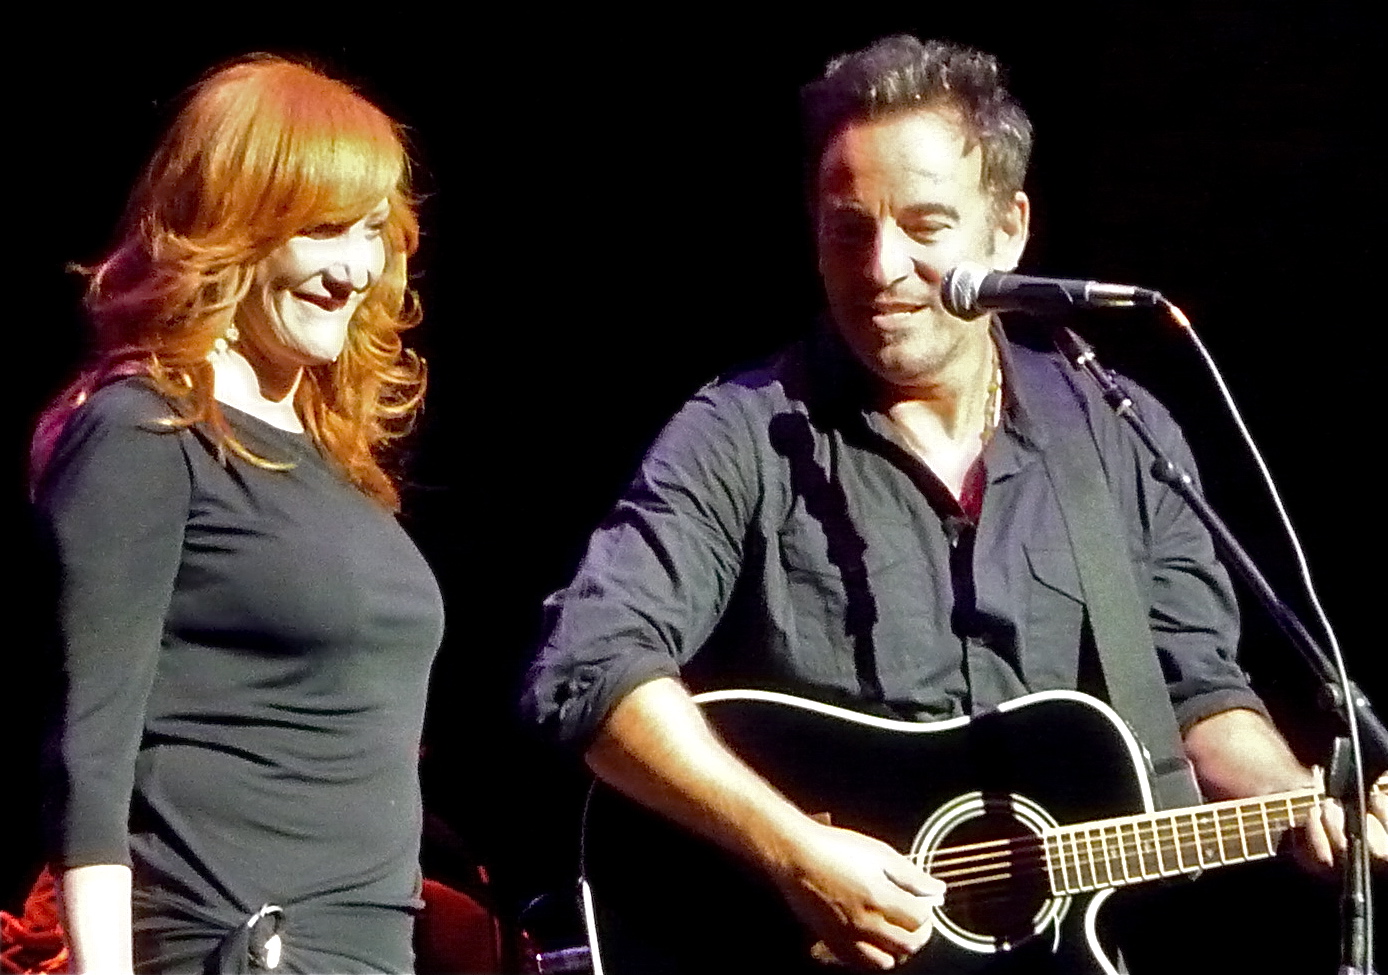 Bruce Springsteen and Patti Scialfa NEW SONG from the Movie “She Came to Me” Called “Addicted to Romance”